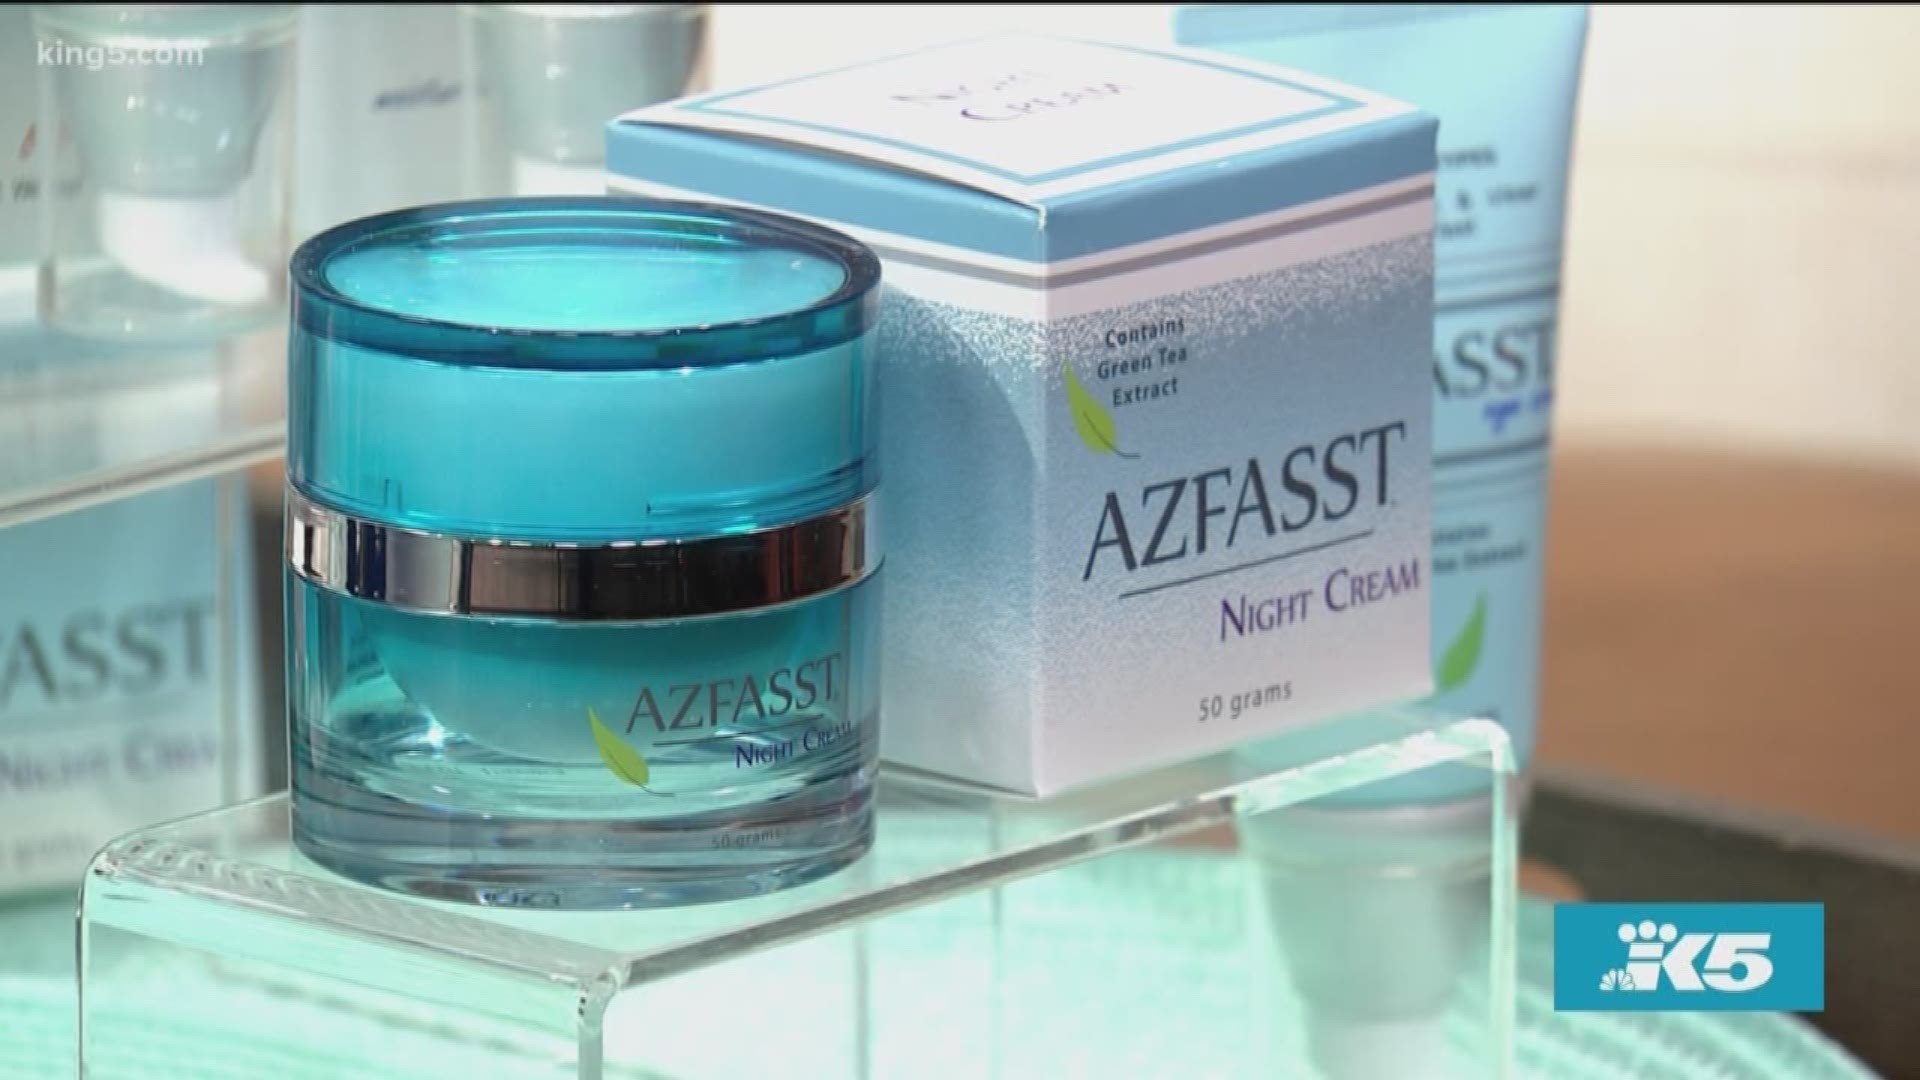 The potent botanical ingredient and hydration boost in the products has properties that can smooth out wrinkles and fine lines naturally.  Sponsored by Azfasst.